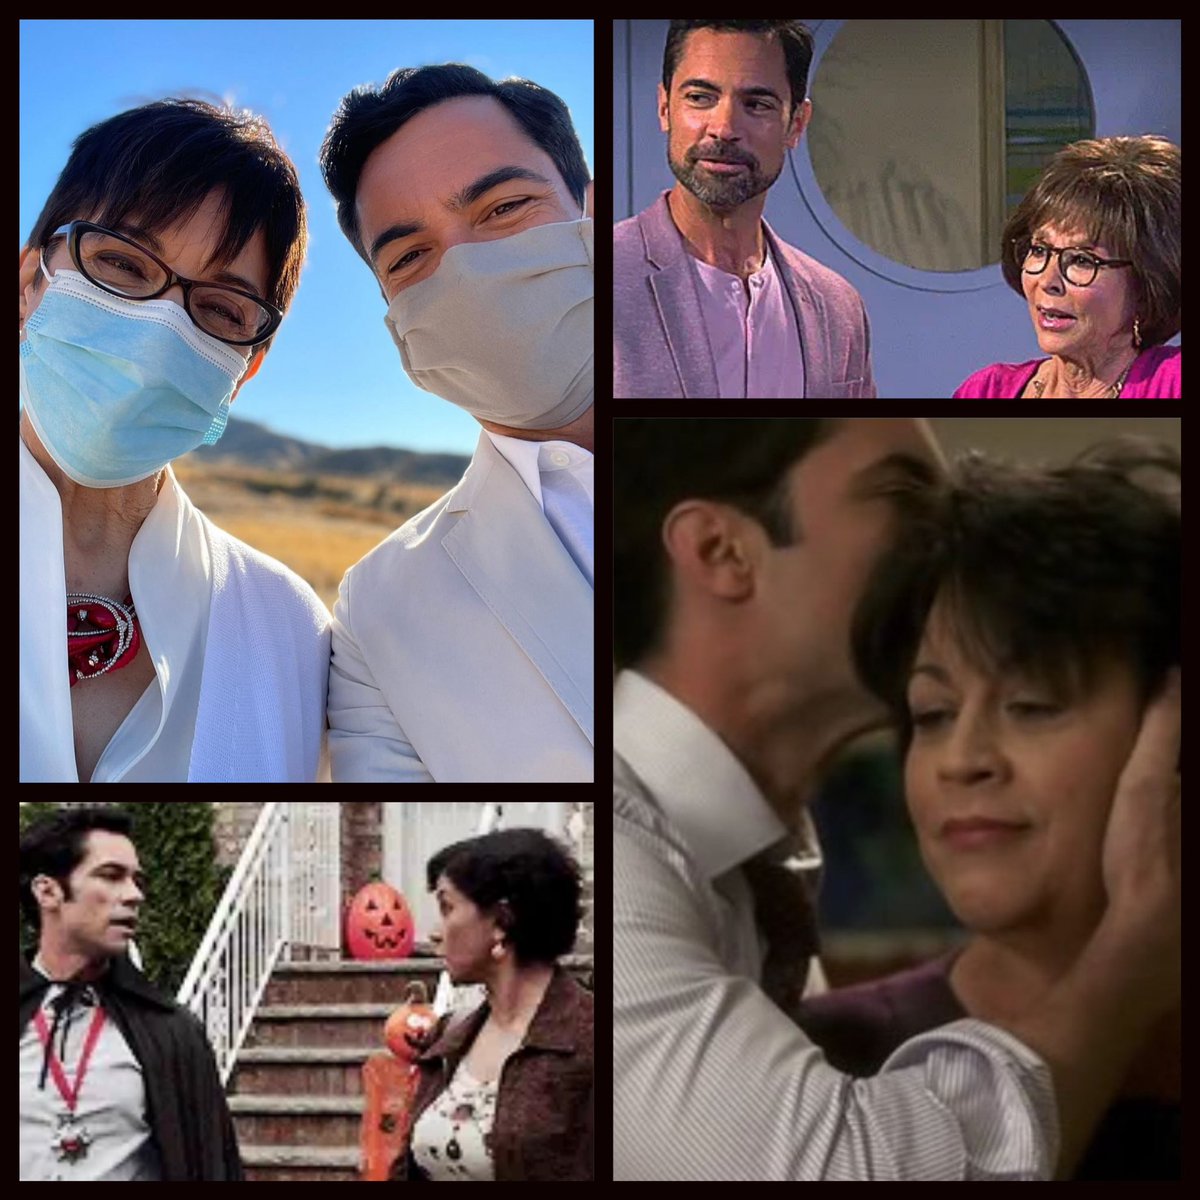 #DailyDannyPino

Happy Mother’s Day to all the incredible mothers of the world. Even Dita Galindo. 

#mayansmc #mayansfx #coldcase #onedayatatime #svu 

#TeamDannyPino
#eldannypino 
#thedannypino
#dannypino
#dannypinofan